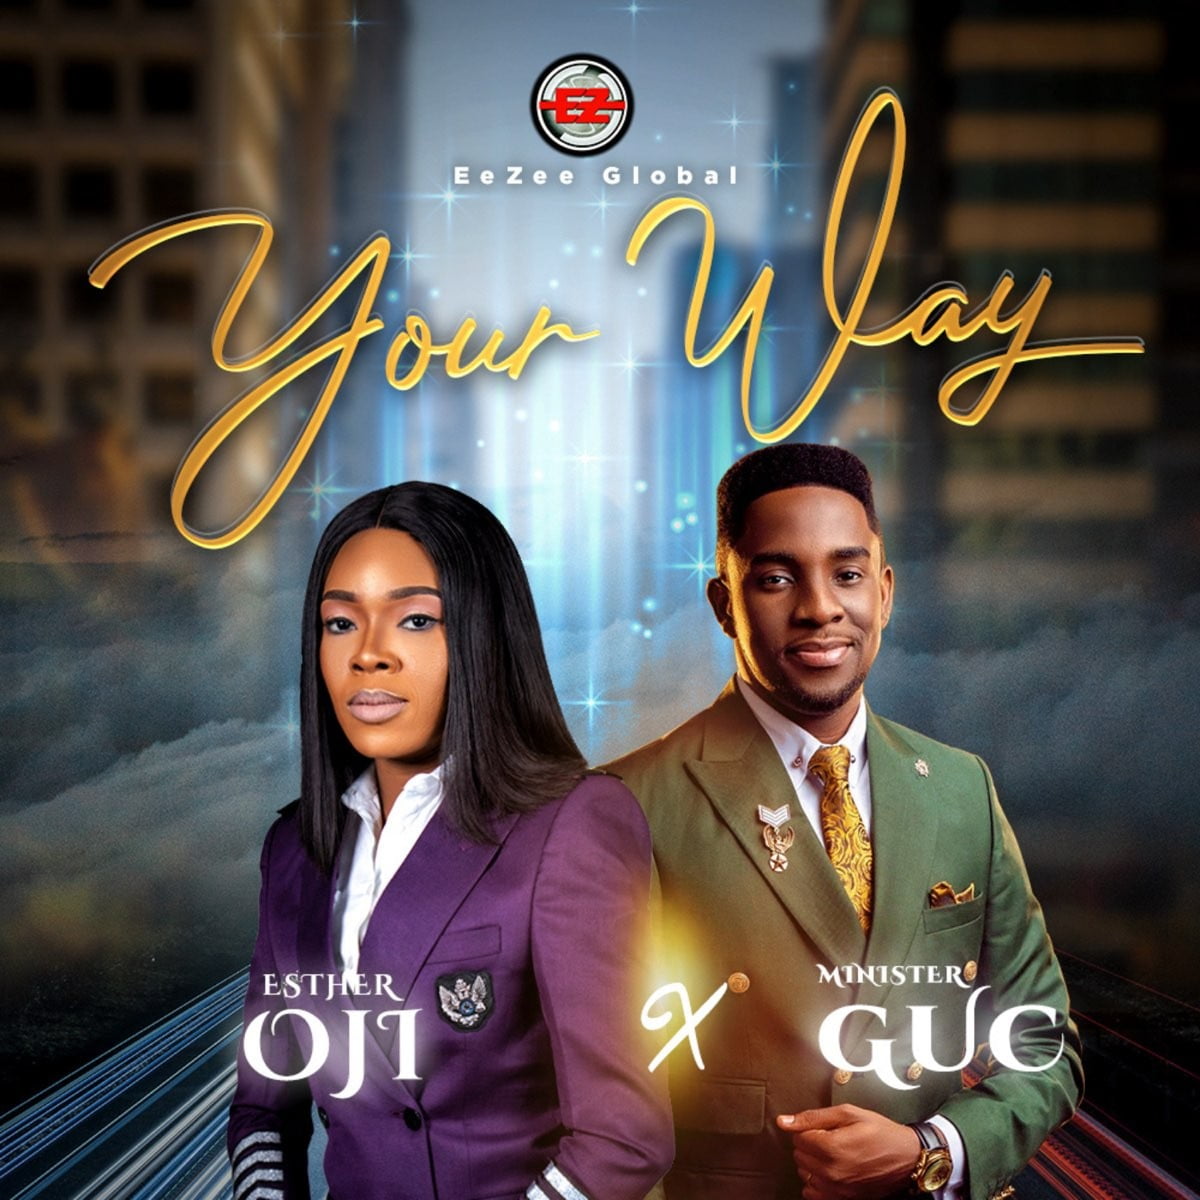 Esther Oji Your Way Ft Minister Guc